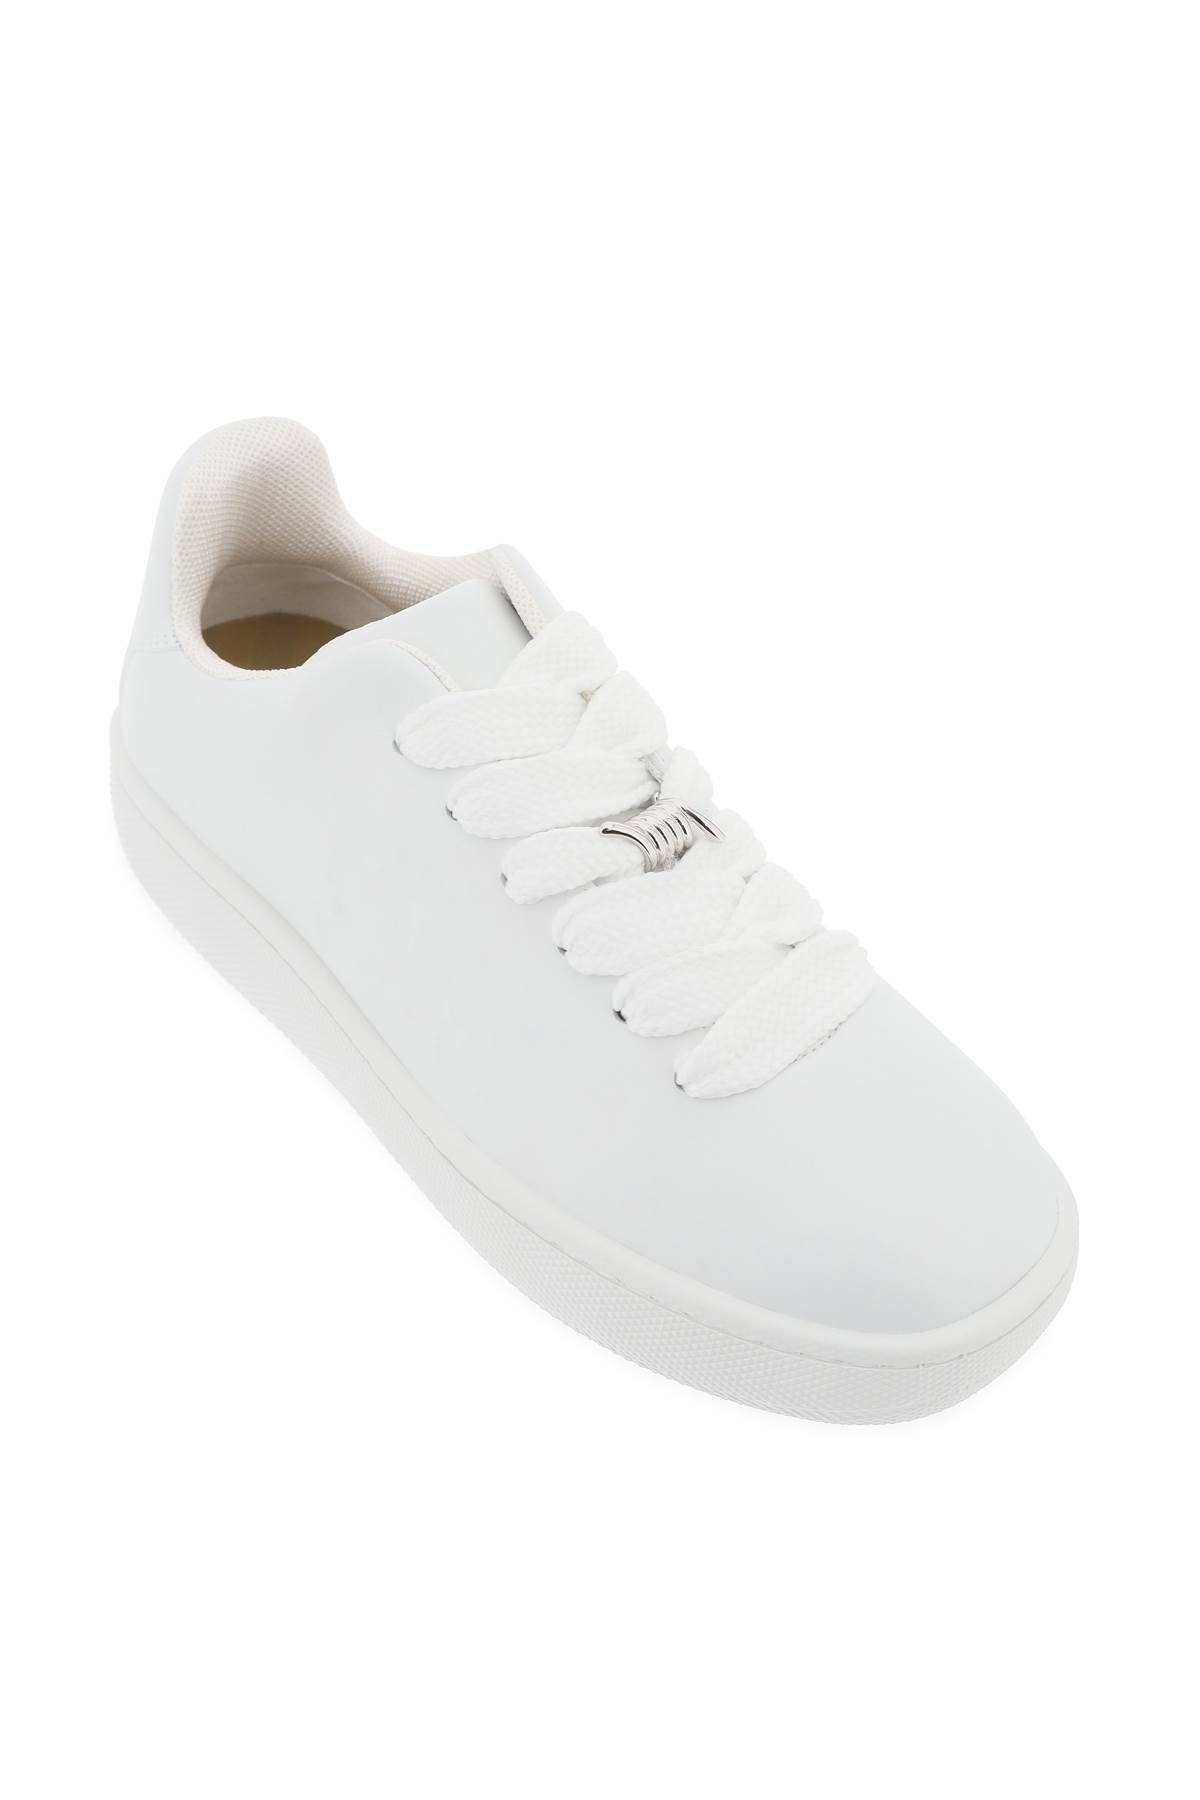 Shop Burberry Leather Sneaker Storage Box In White